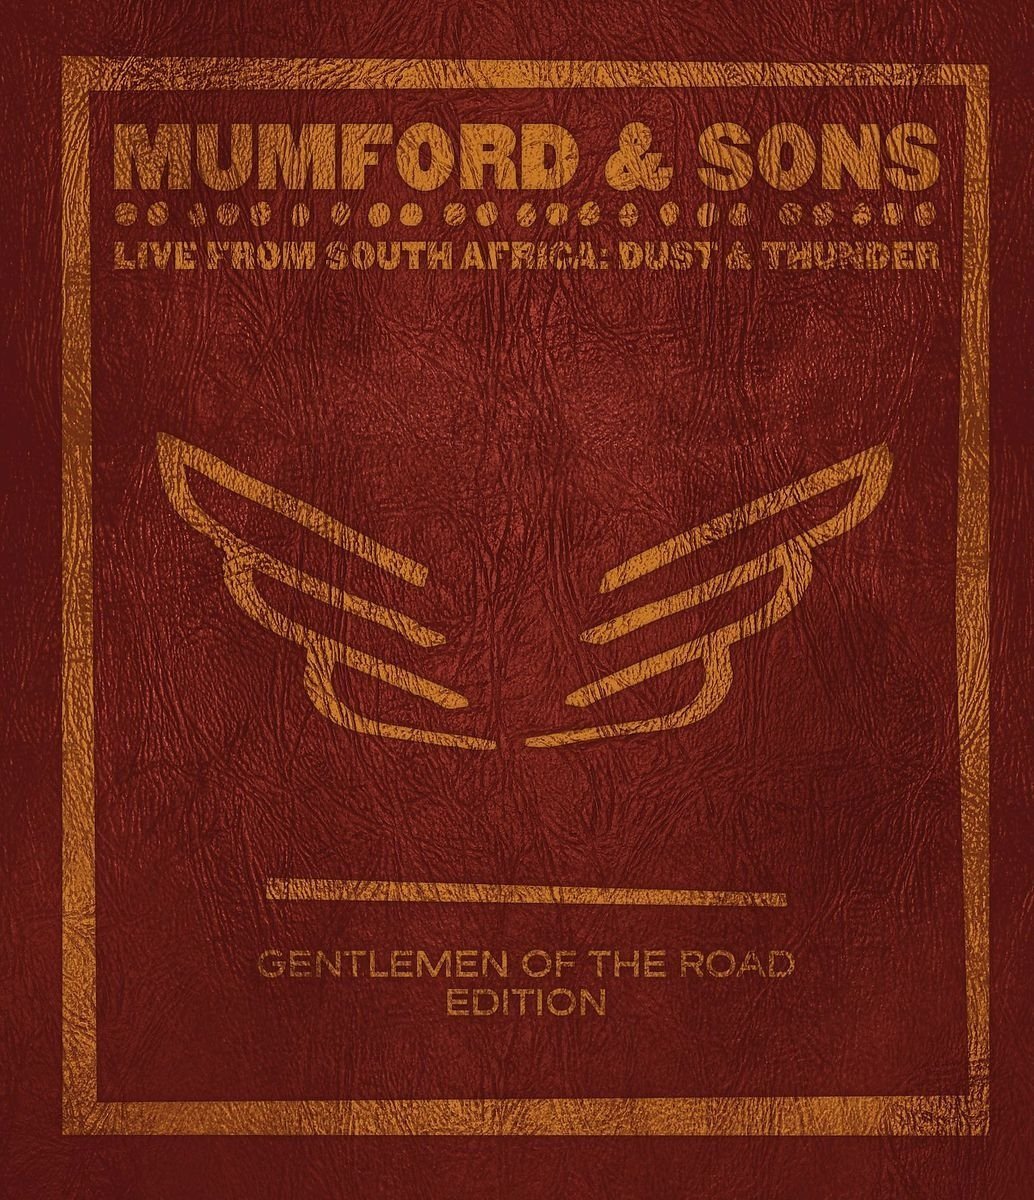 Mumford And Sons: Live From South Africa: Dust And Thunder 2 Blu-ray + CD | Mumford And Sons